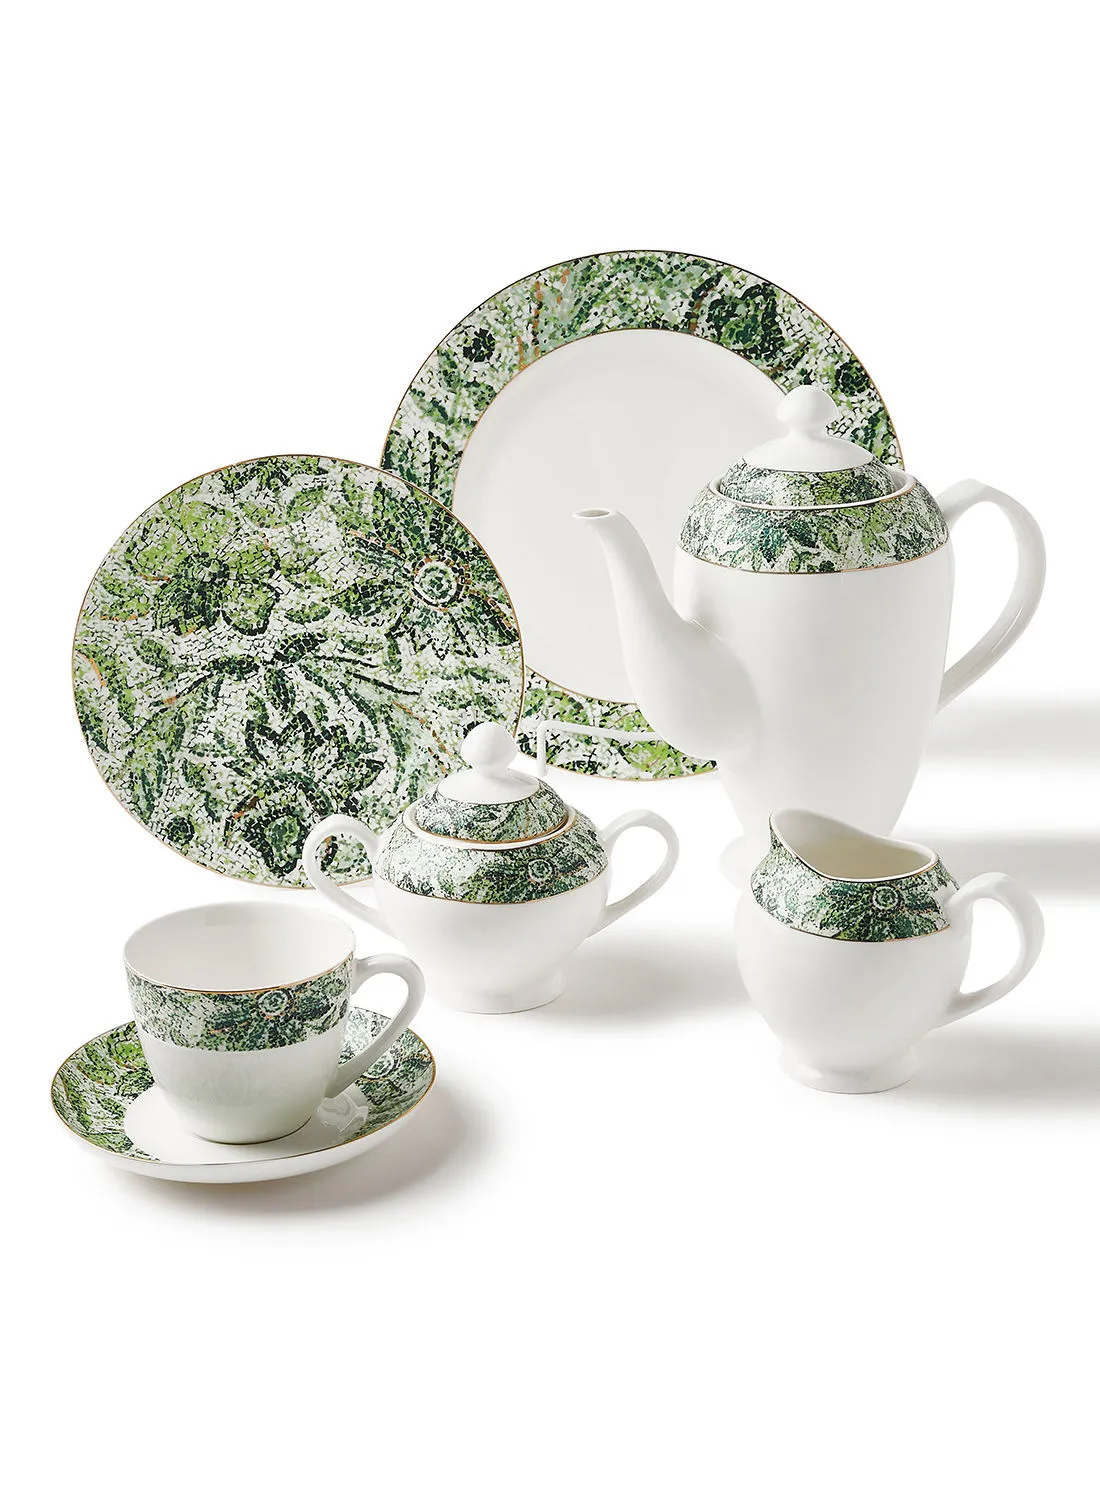 noon east 70 Piece Ceramic Dinner Set Premium Quality - Dishes, Plates - Dinner Plate, Side Plate, Bowl, Cups, Serving Dish And Bowl - Serves 12 - Festive Design Mosaic Green